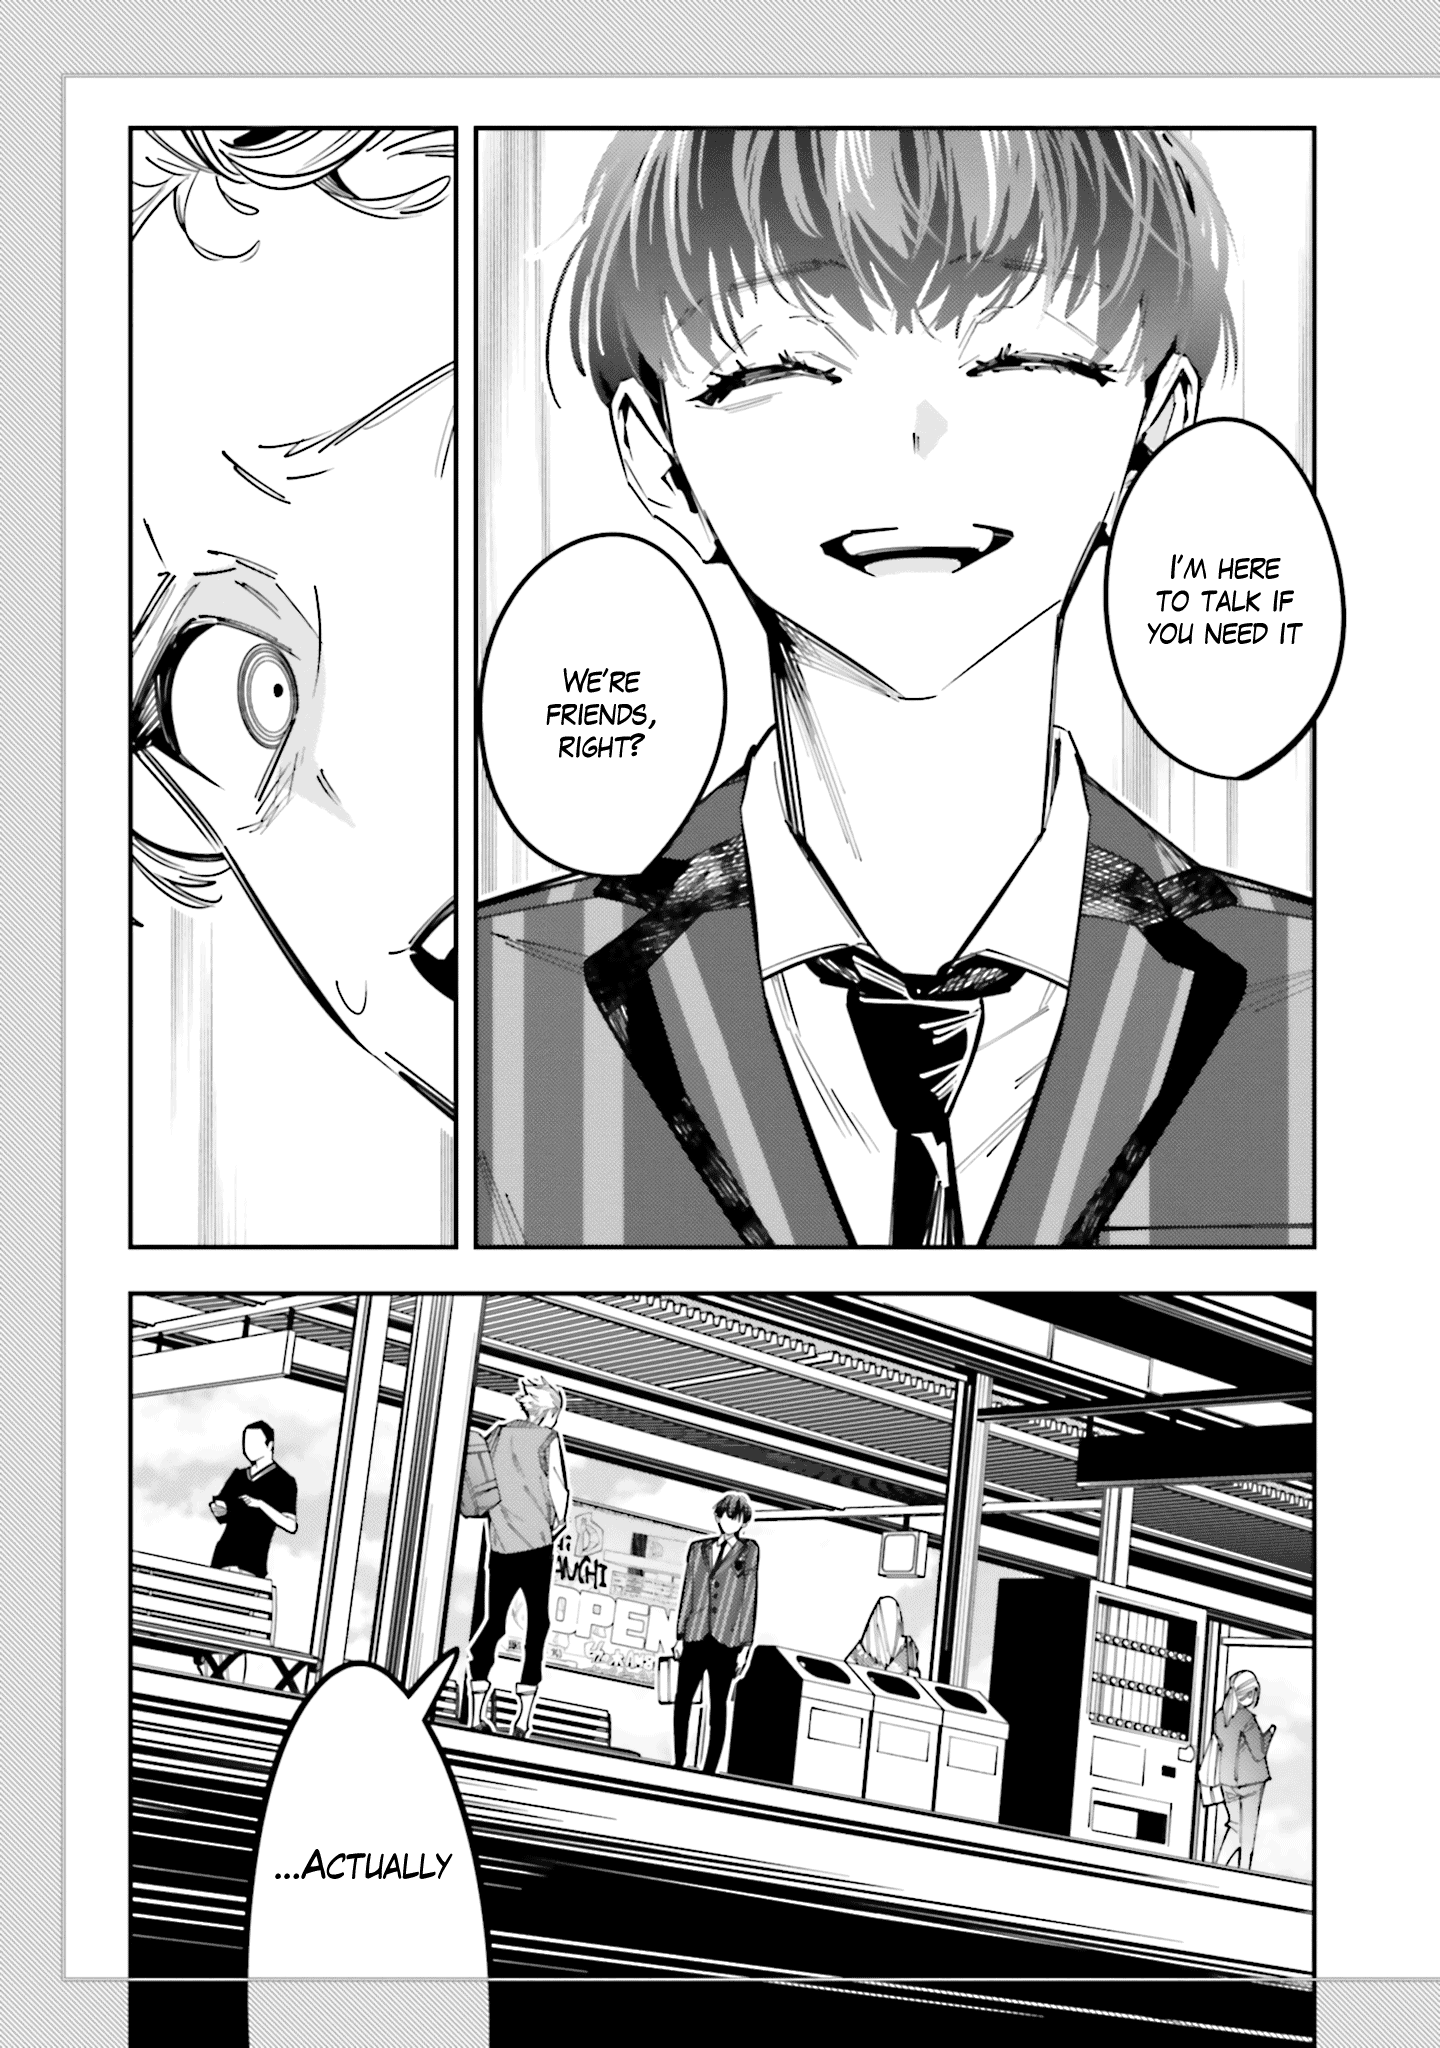 I Reincarnated As The Little Sister Of A Death Game Manga's Murder Mastermind And Failed Chapter 11 #17